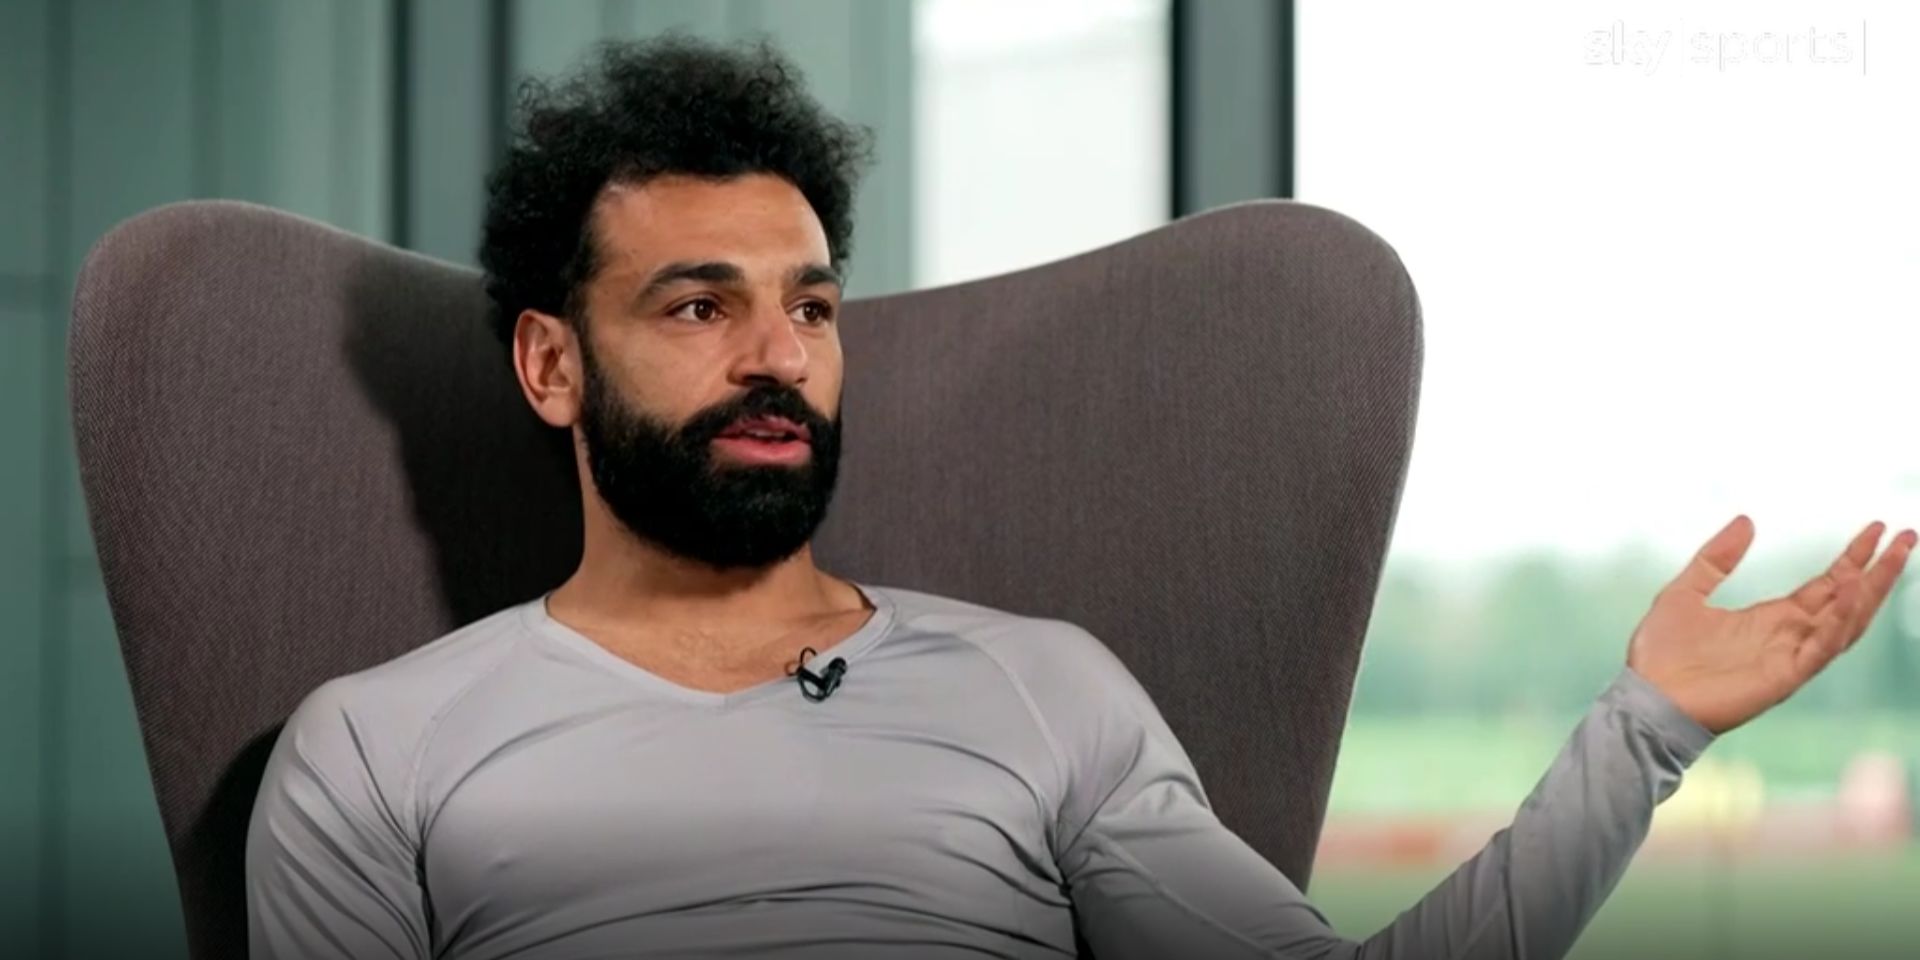 (Video) Salah addresses plans for his Anfield future after Klopp leaves Liverpool